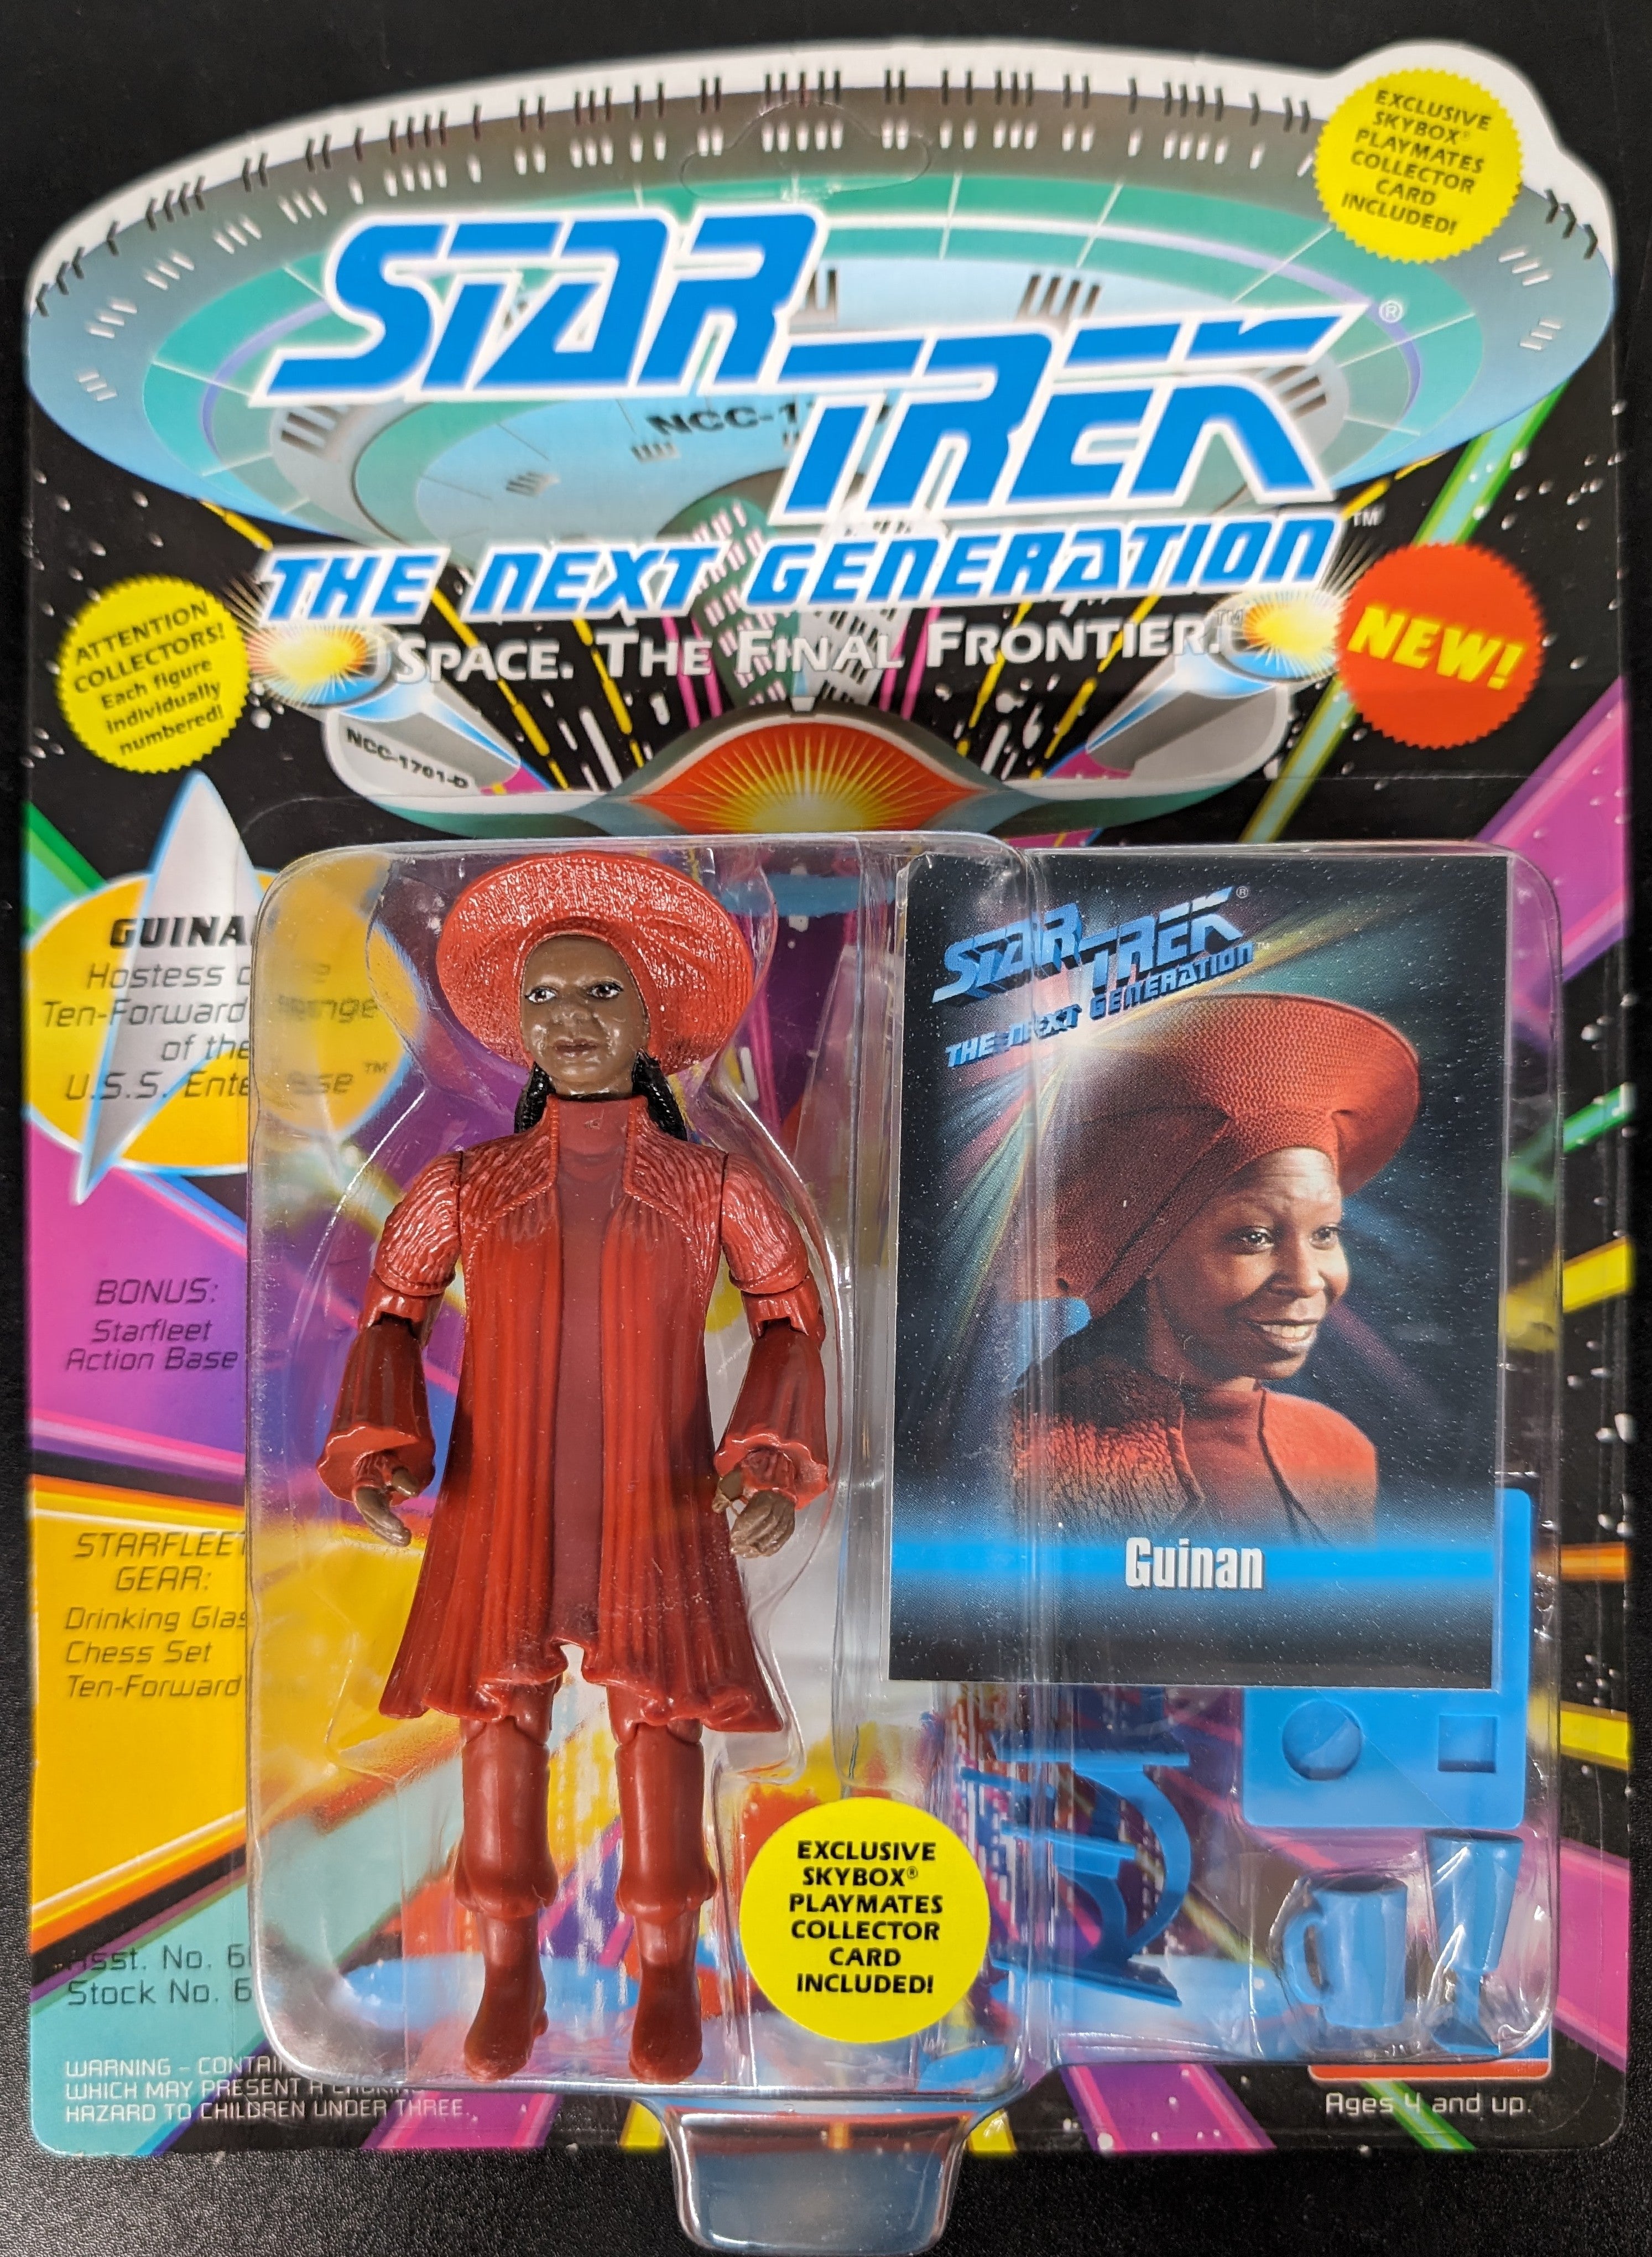 1993 Playmates Star Trek The Next Generation Guinan with Starfleet Action Base and Gear Action Figure